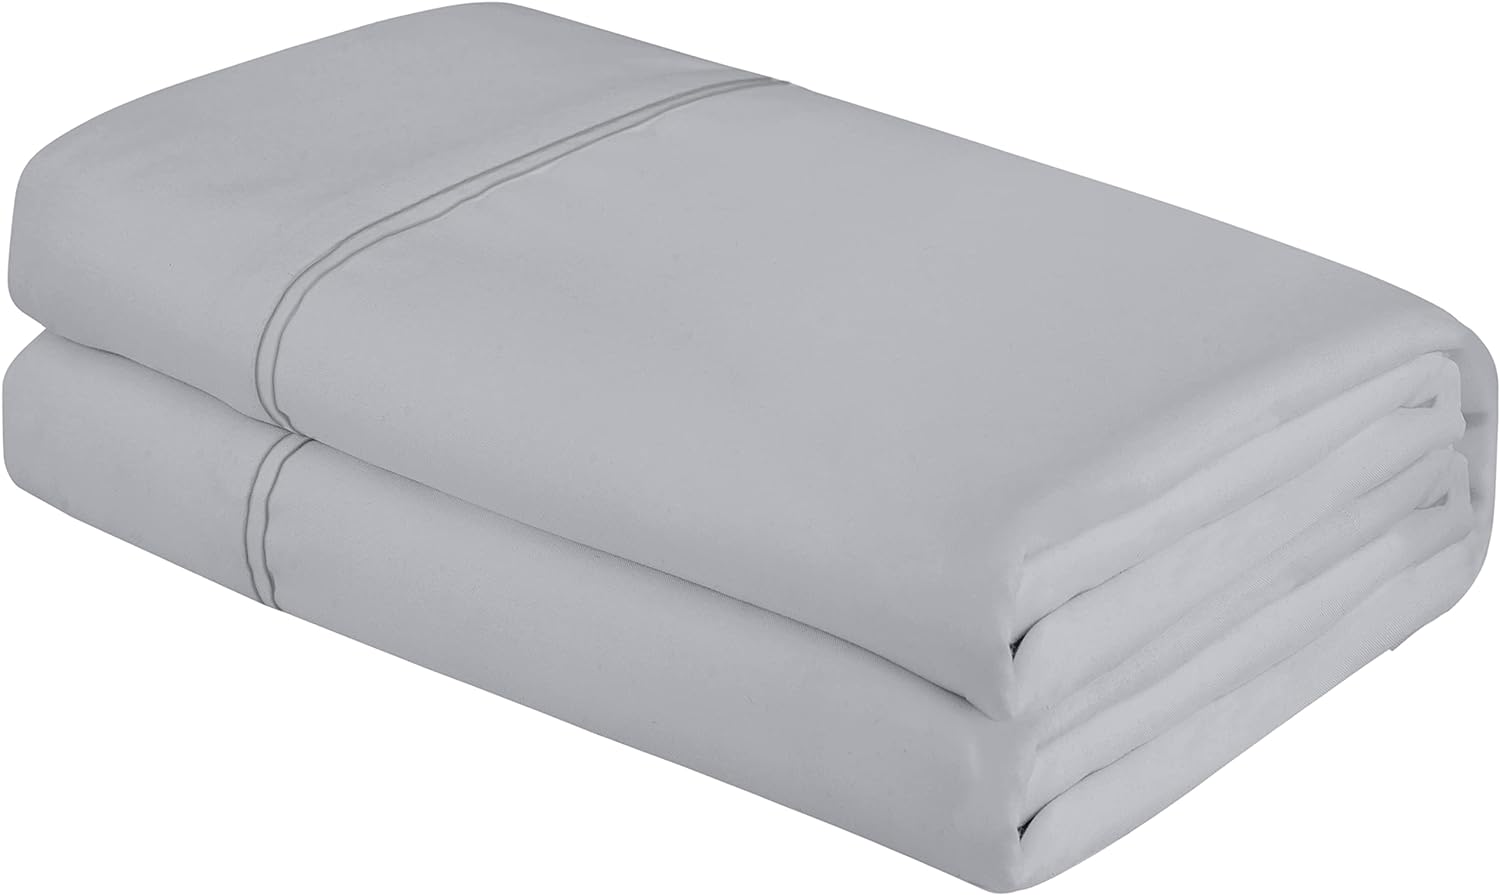 Royale Linens Full Size Flat Sheet Only - Brushed 1800 Microfiber - Ultra Soft & Breathable - Wrinkle & Stain Resistant - Hotel Quality Flat Sheet Sold Separately - Top Sheet for Bed - (Full, Silver)